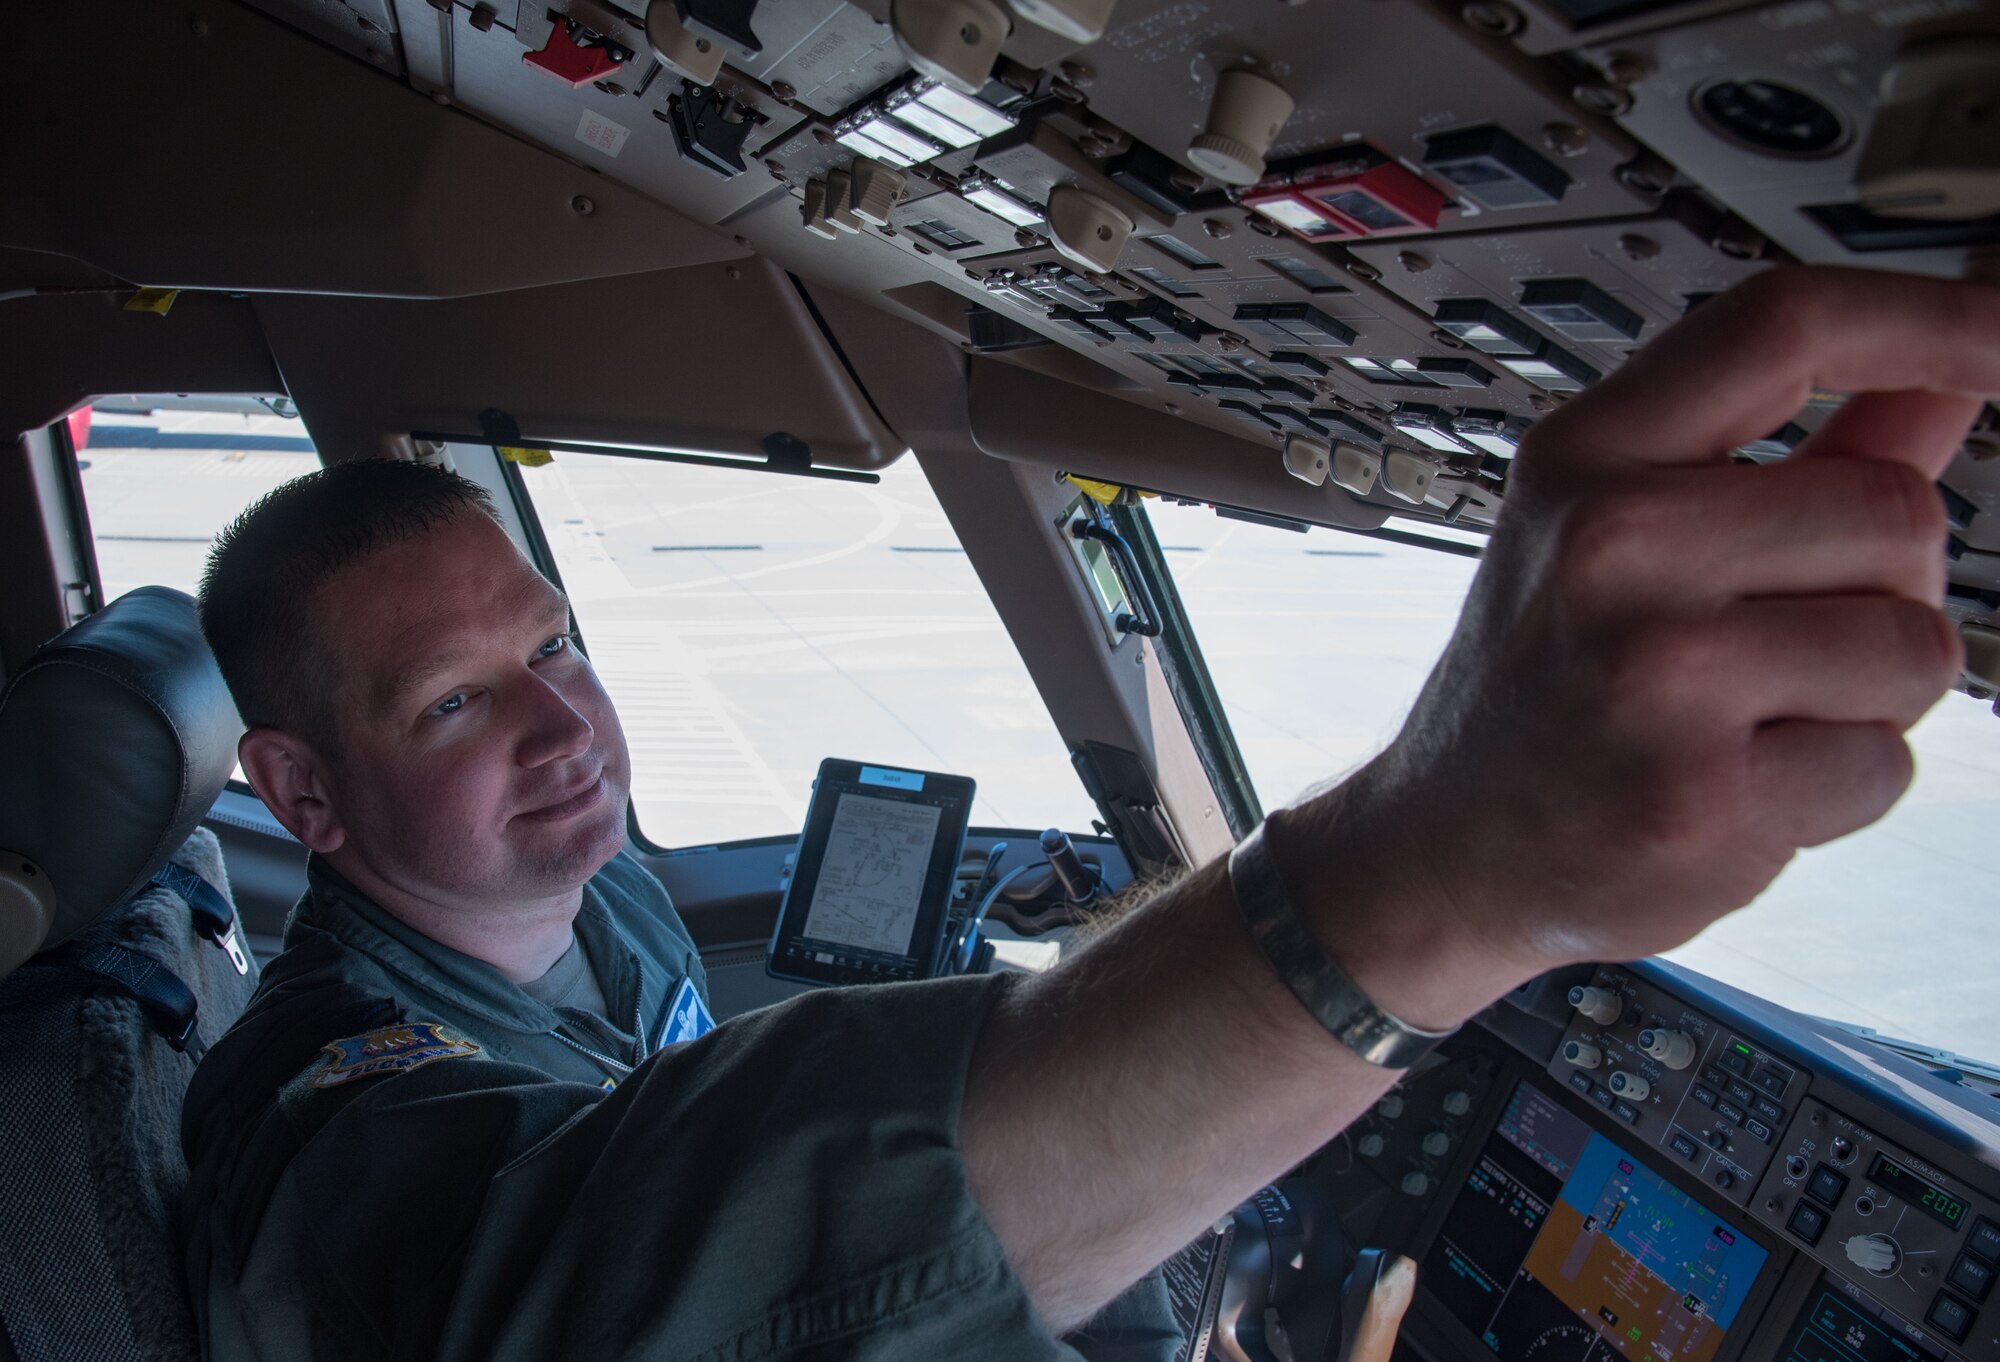 Col. Mark Baran, 22nd Air Refueling Wing vice commander, prepares for flight in a KC-46 Pegasus May 19, 2020, at McConnell Air Force Base, Kansas. Throughout Baran’s career, he has worn the memorial bracelet for luck. He honors Lt. Col. Fredric M. Mellor, prior Missing in Action Vietnam pilot, and plans to send the bracelet to Mellor’s family when he hangs up his flight suit. (U.S. Air Force photo by Senior Airman Michaela R. Slanchik)